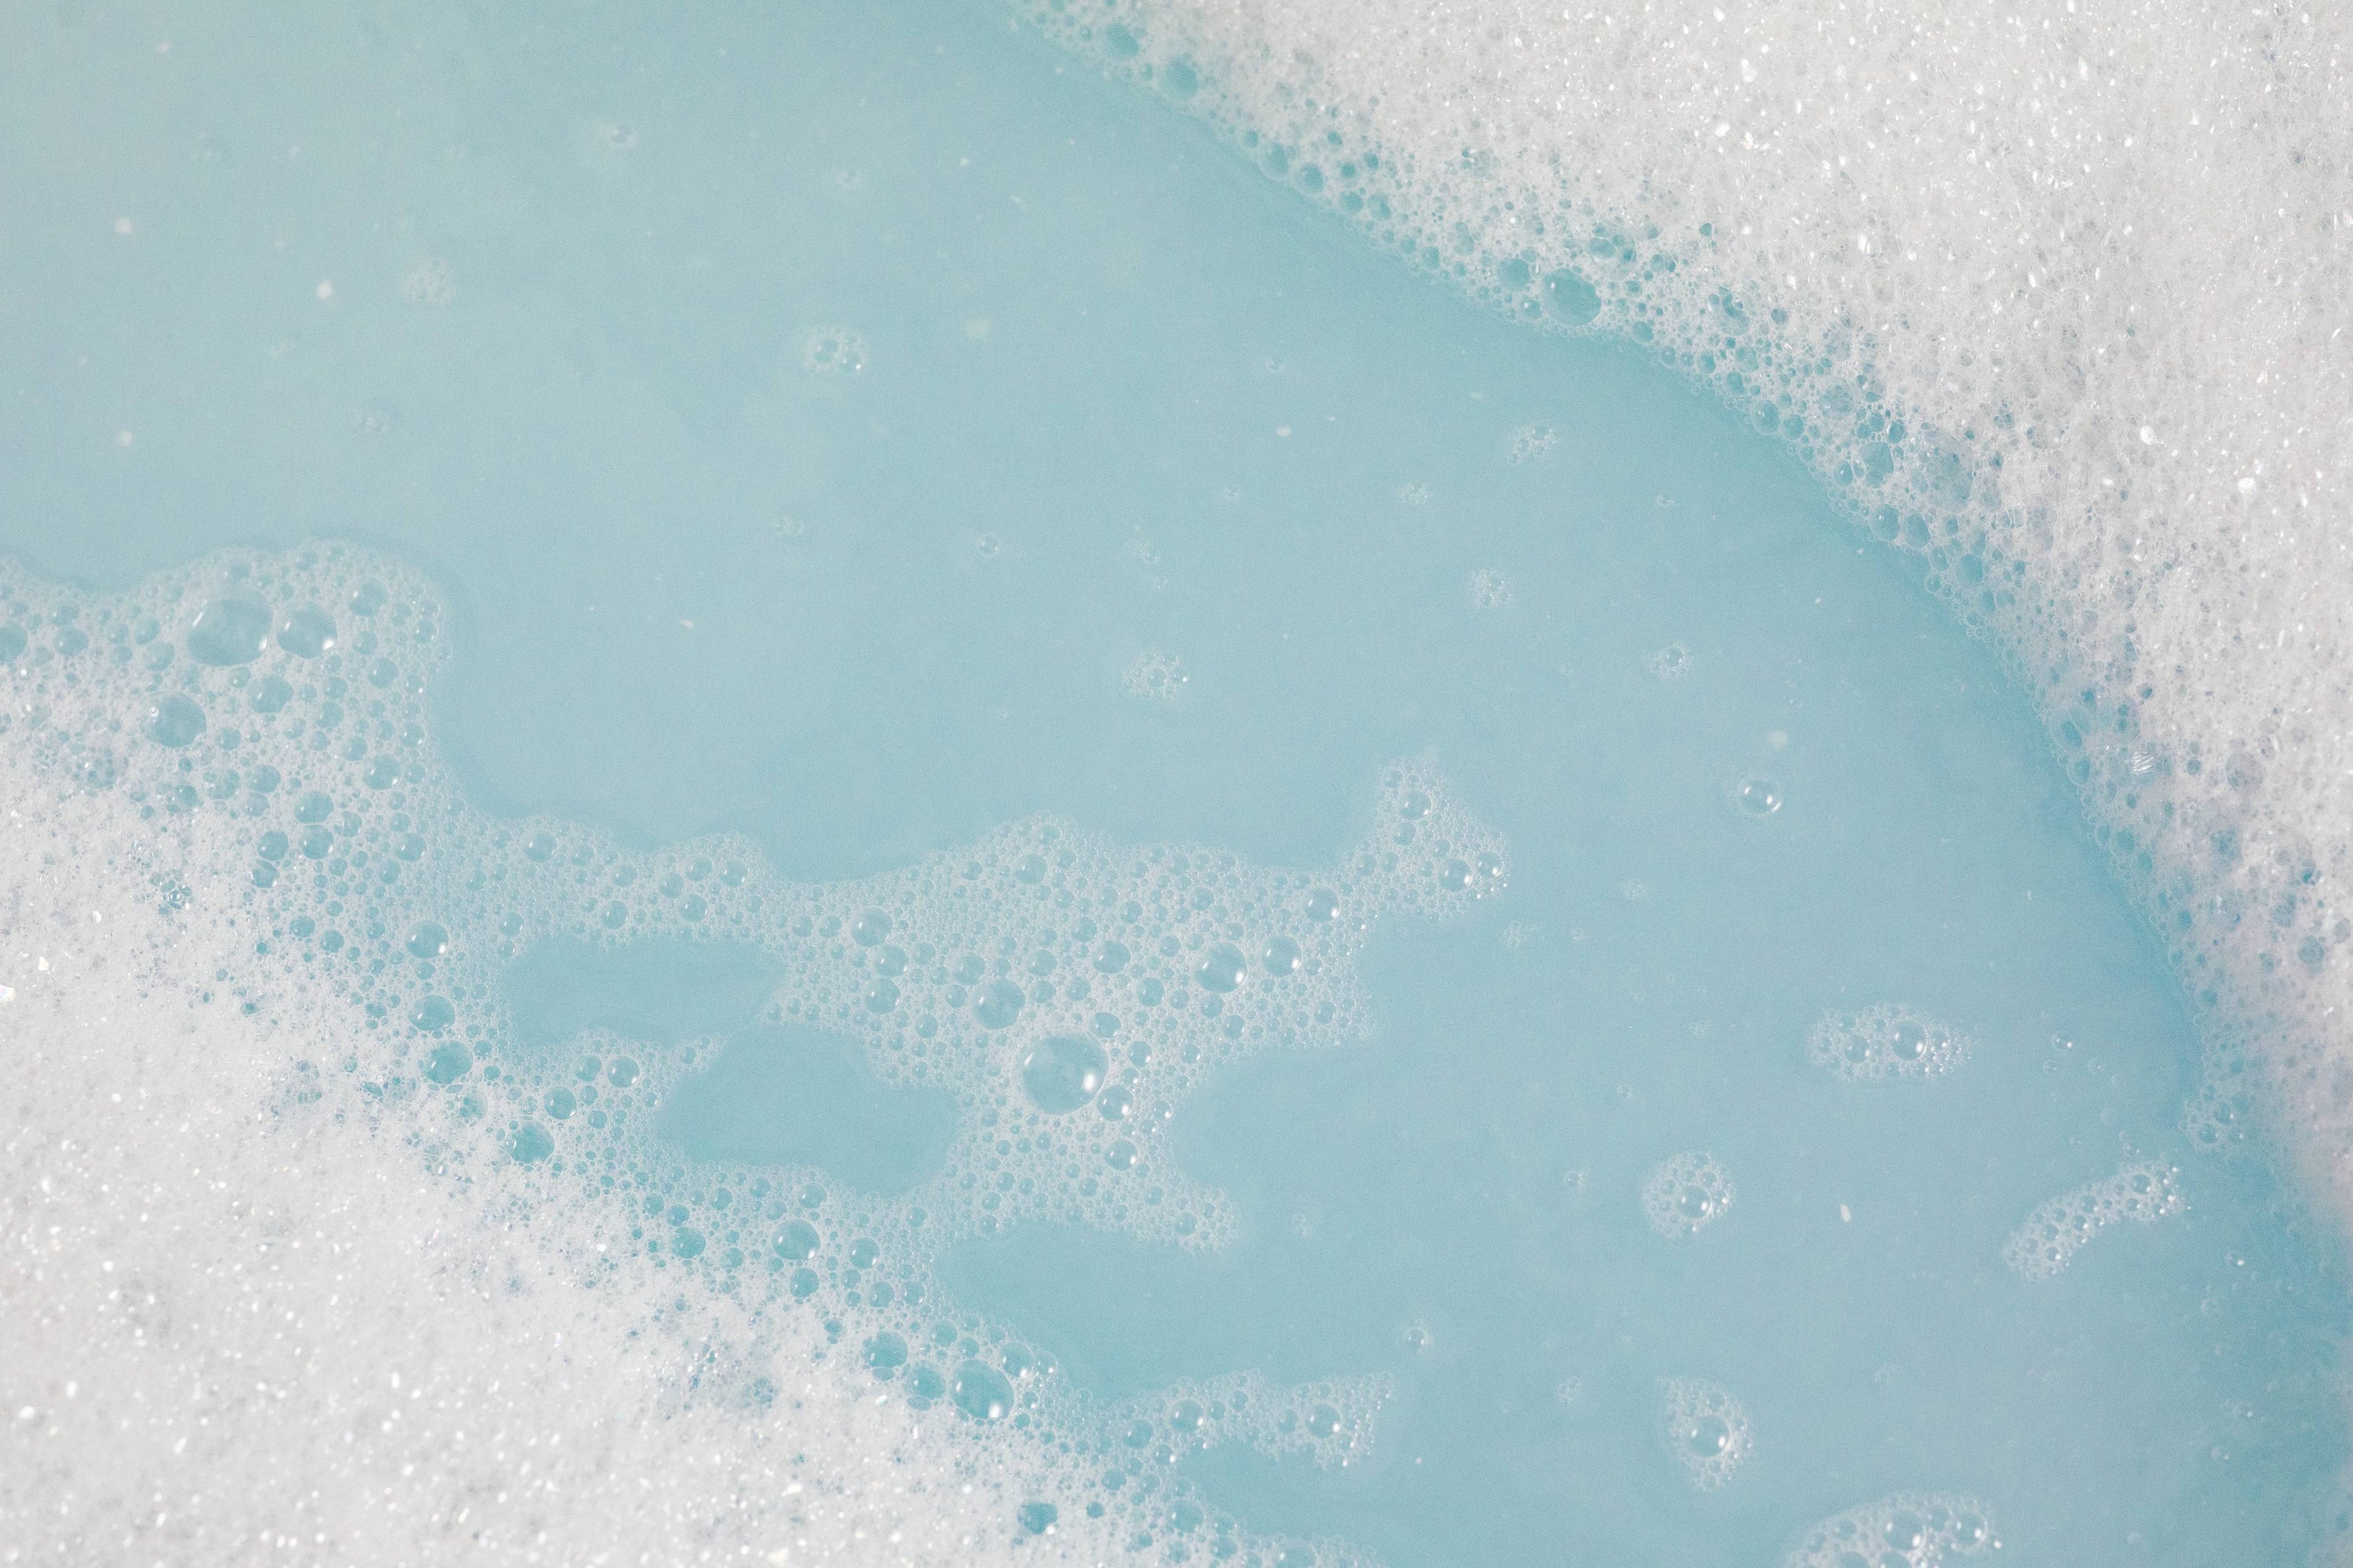 Image shows a close-up of fresh, glacier-blue water surrounded by crisp white bubbles.